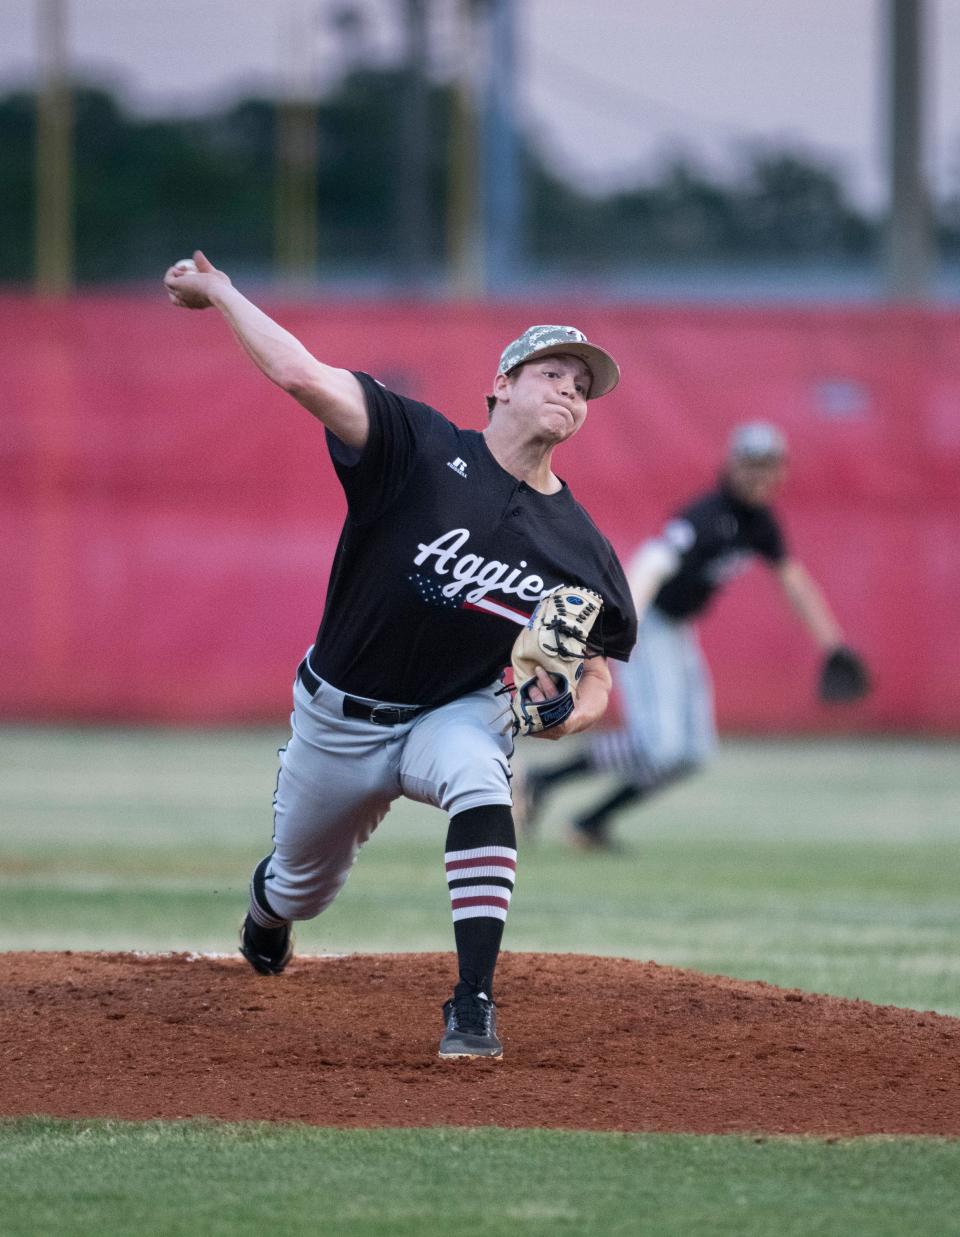 Josiah Glodfelter (6) pitches during the Tate vs Pace baseball game at Pace High School on Friday, April 15, 2022.